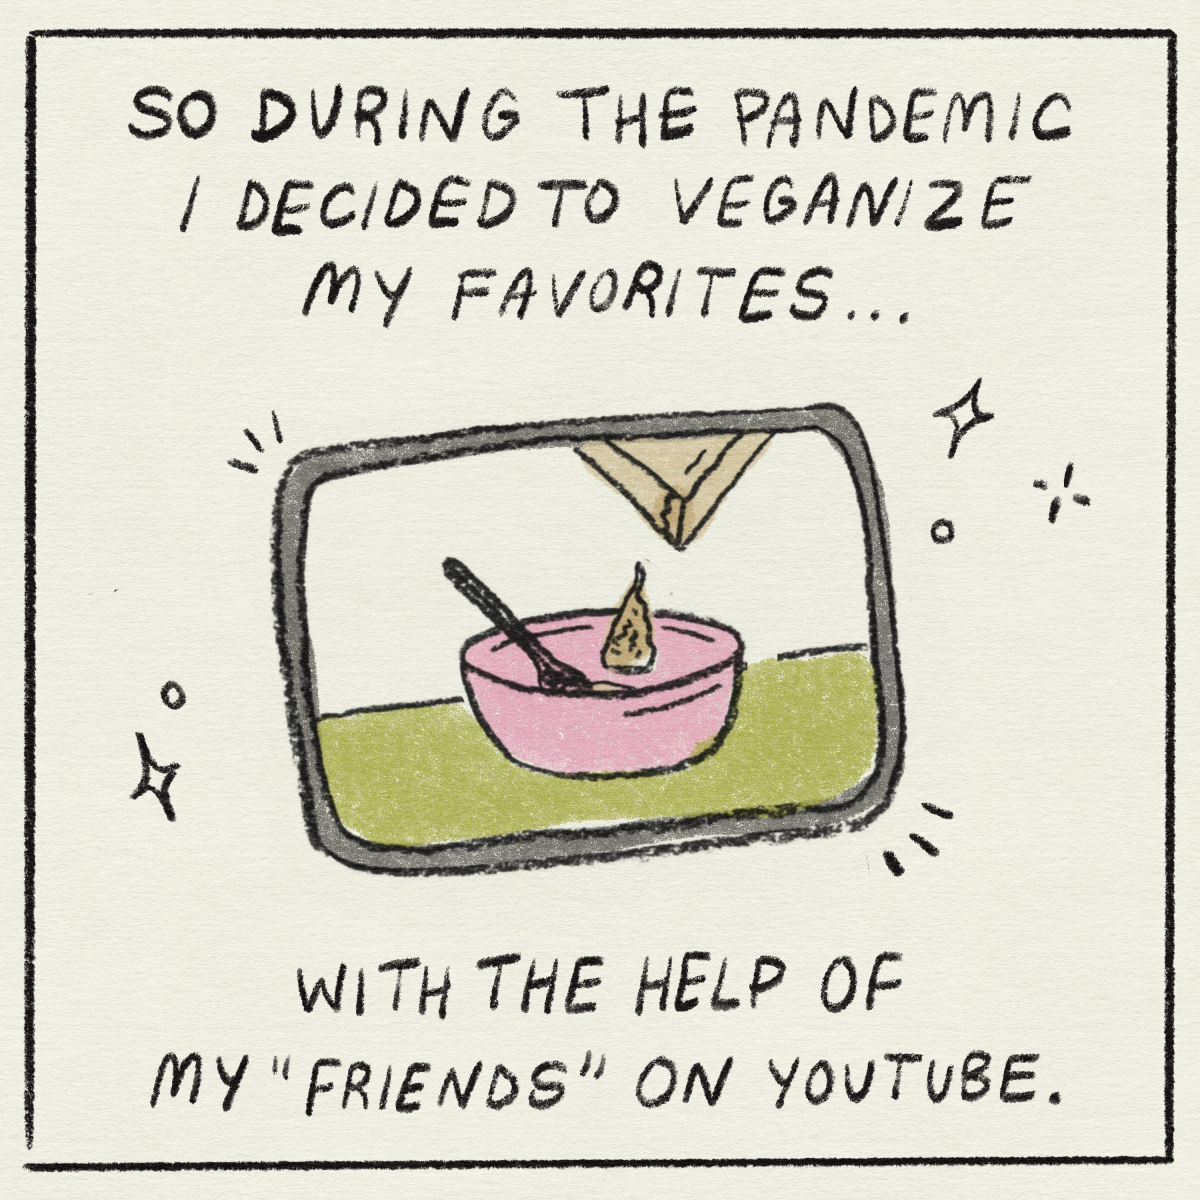 "So during the pandemic I decided to veganize my favorites... With the help of my 'friends' on YouTube."